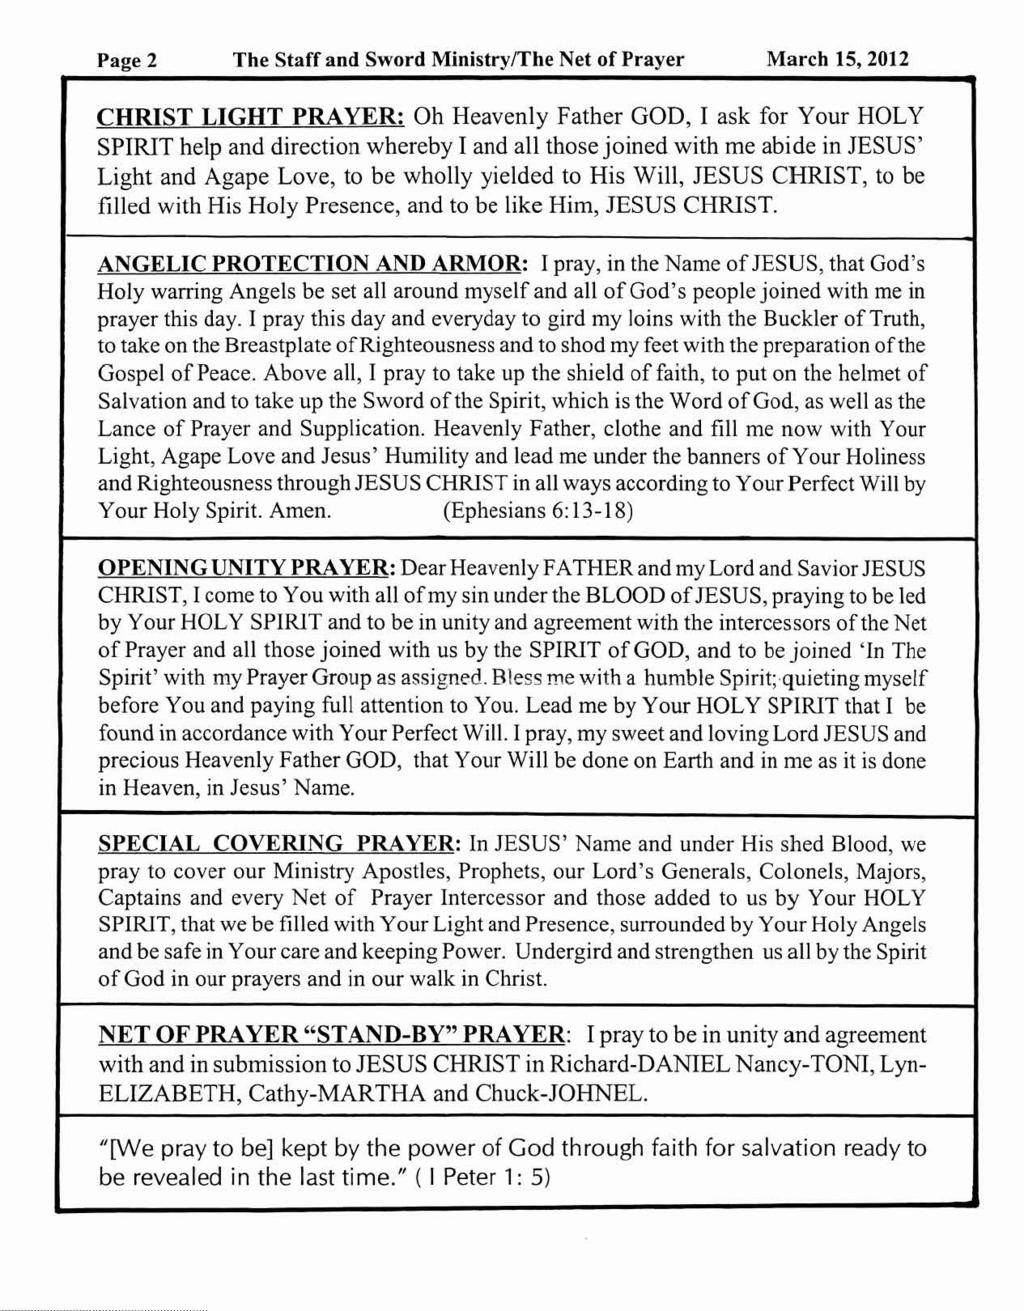 Page 2 The Staff and Sword Ministr y /The Net of Prayer March 15, 2012 CHRIST LIGHT PRAYER: Oh Heavenly Father GOD, I ask for Your HOLY SPIRIT help and direction whereby I and all those joined with